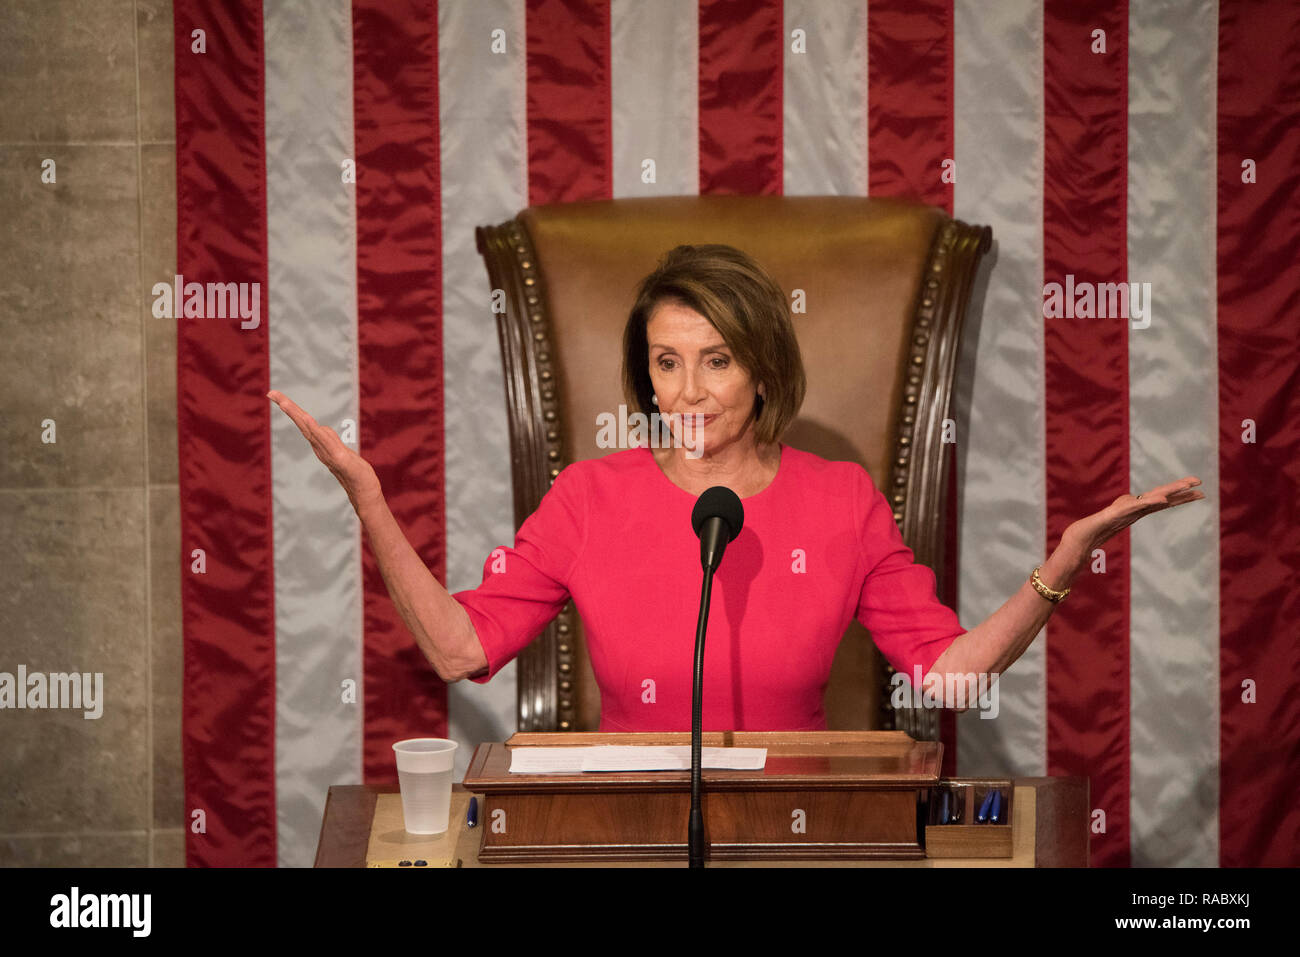 Washington DC, USA. 3rd January, 2019. Washington DC, January 3, 2019, USA: Nancy Pelosi, D-CA, addresses the 116th Congress after she becomes the Speaker of the House for the second time. Credit: Patsy Lynch/Alamy Live News Stock Photo